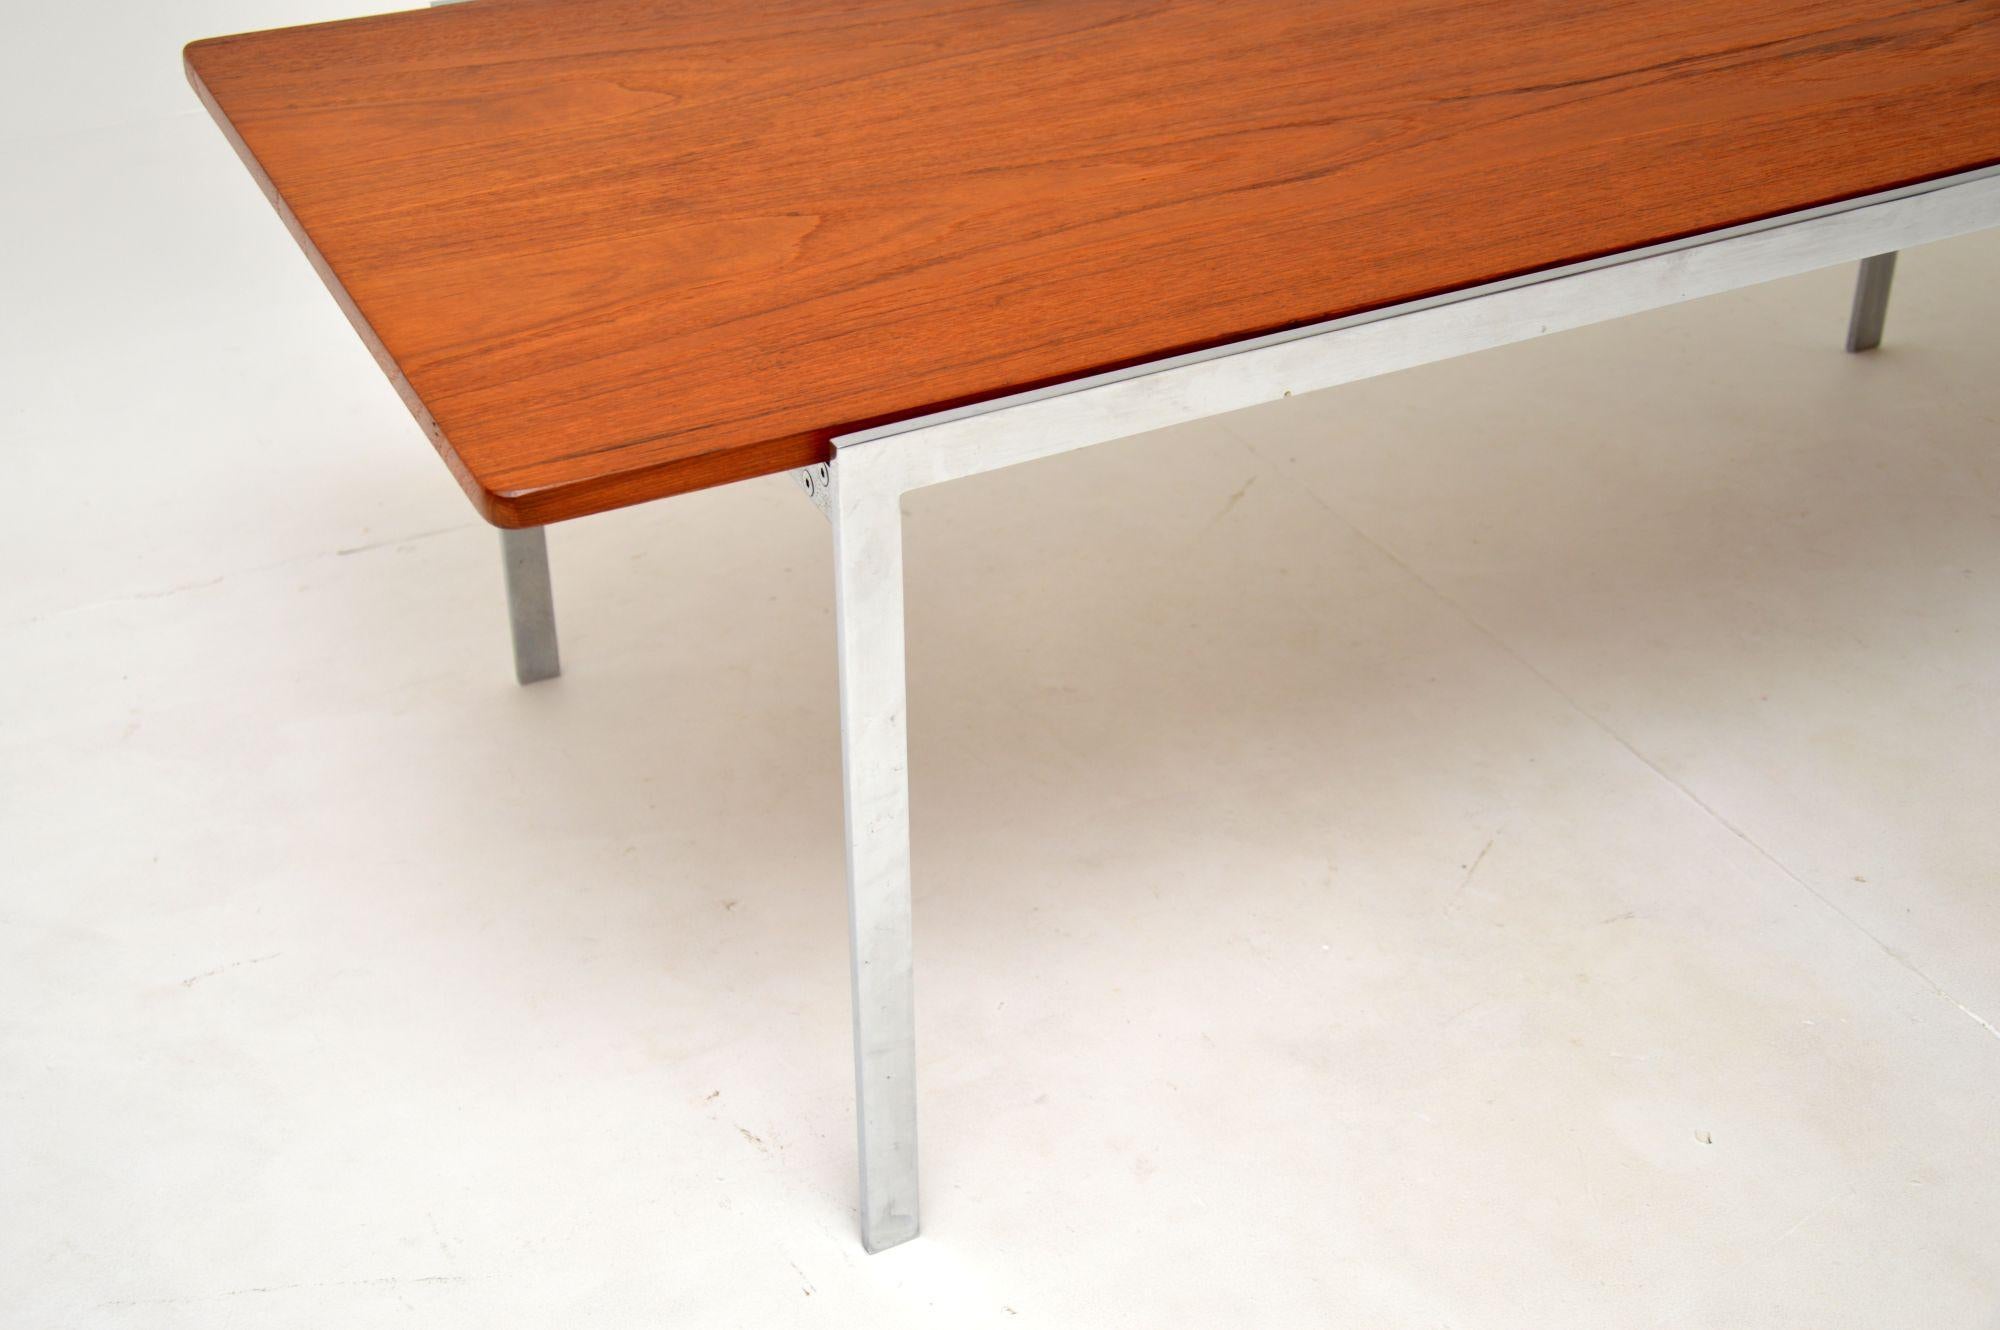 Danish Vintage Teak and Chrome Coffee Table by Arne Jacobsen For Sale 3